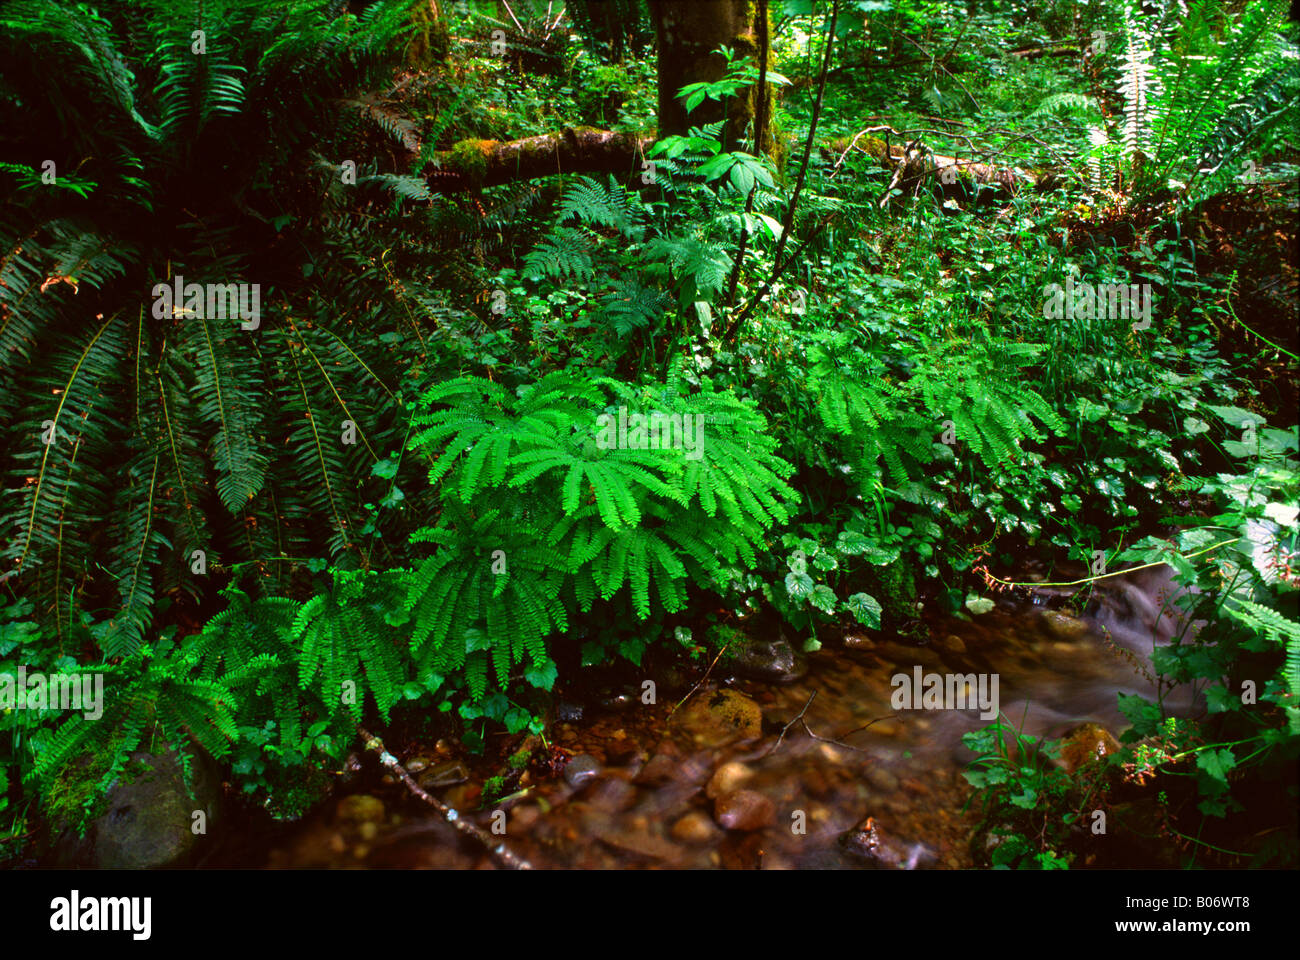 Sword fern, wood fern, and maidenhair fern grow along a creek in the forest of Tiger Mountain, Washington State, USA Stock Photo